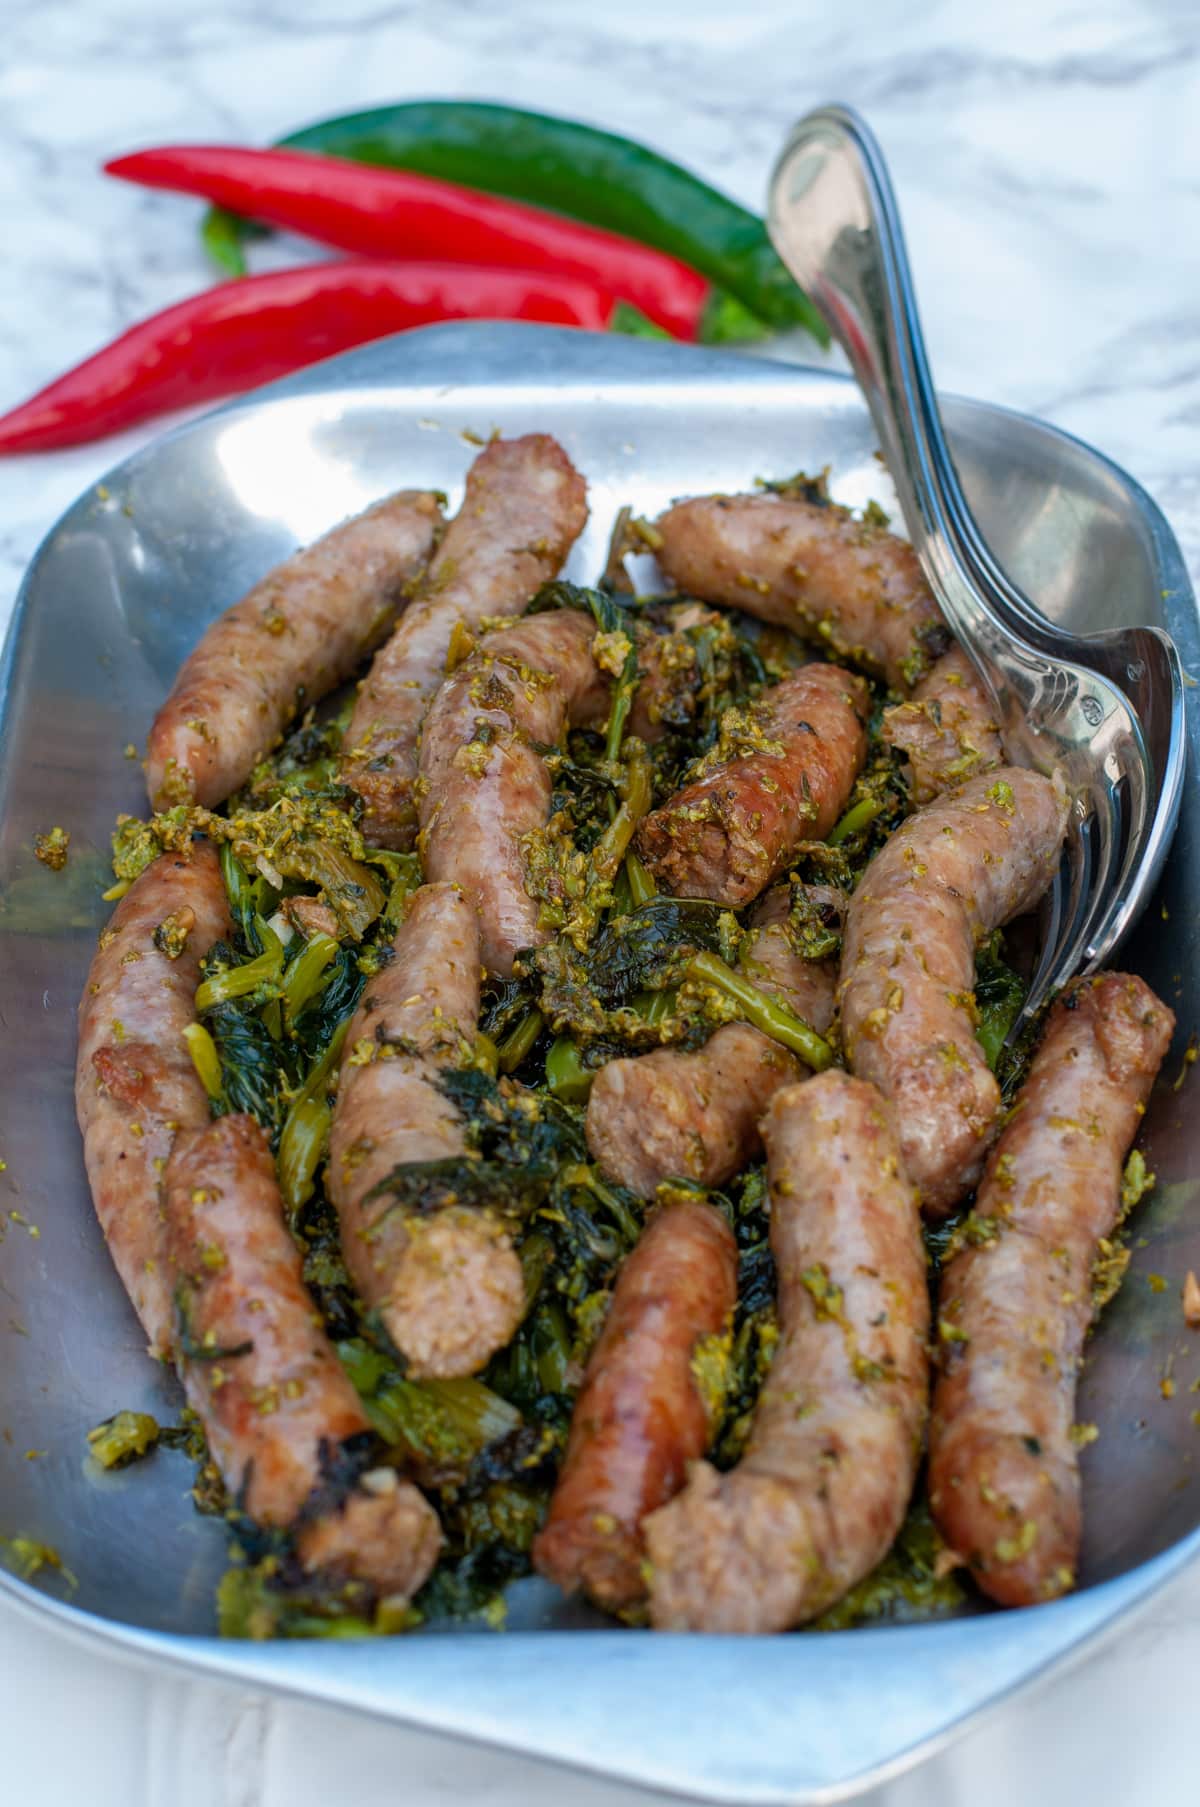 Serve sausage and Friarielli as a main dish